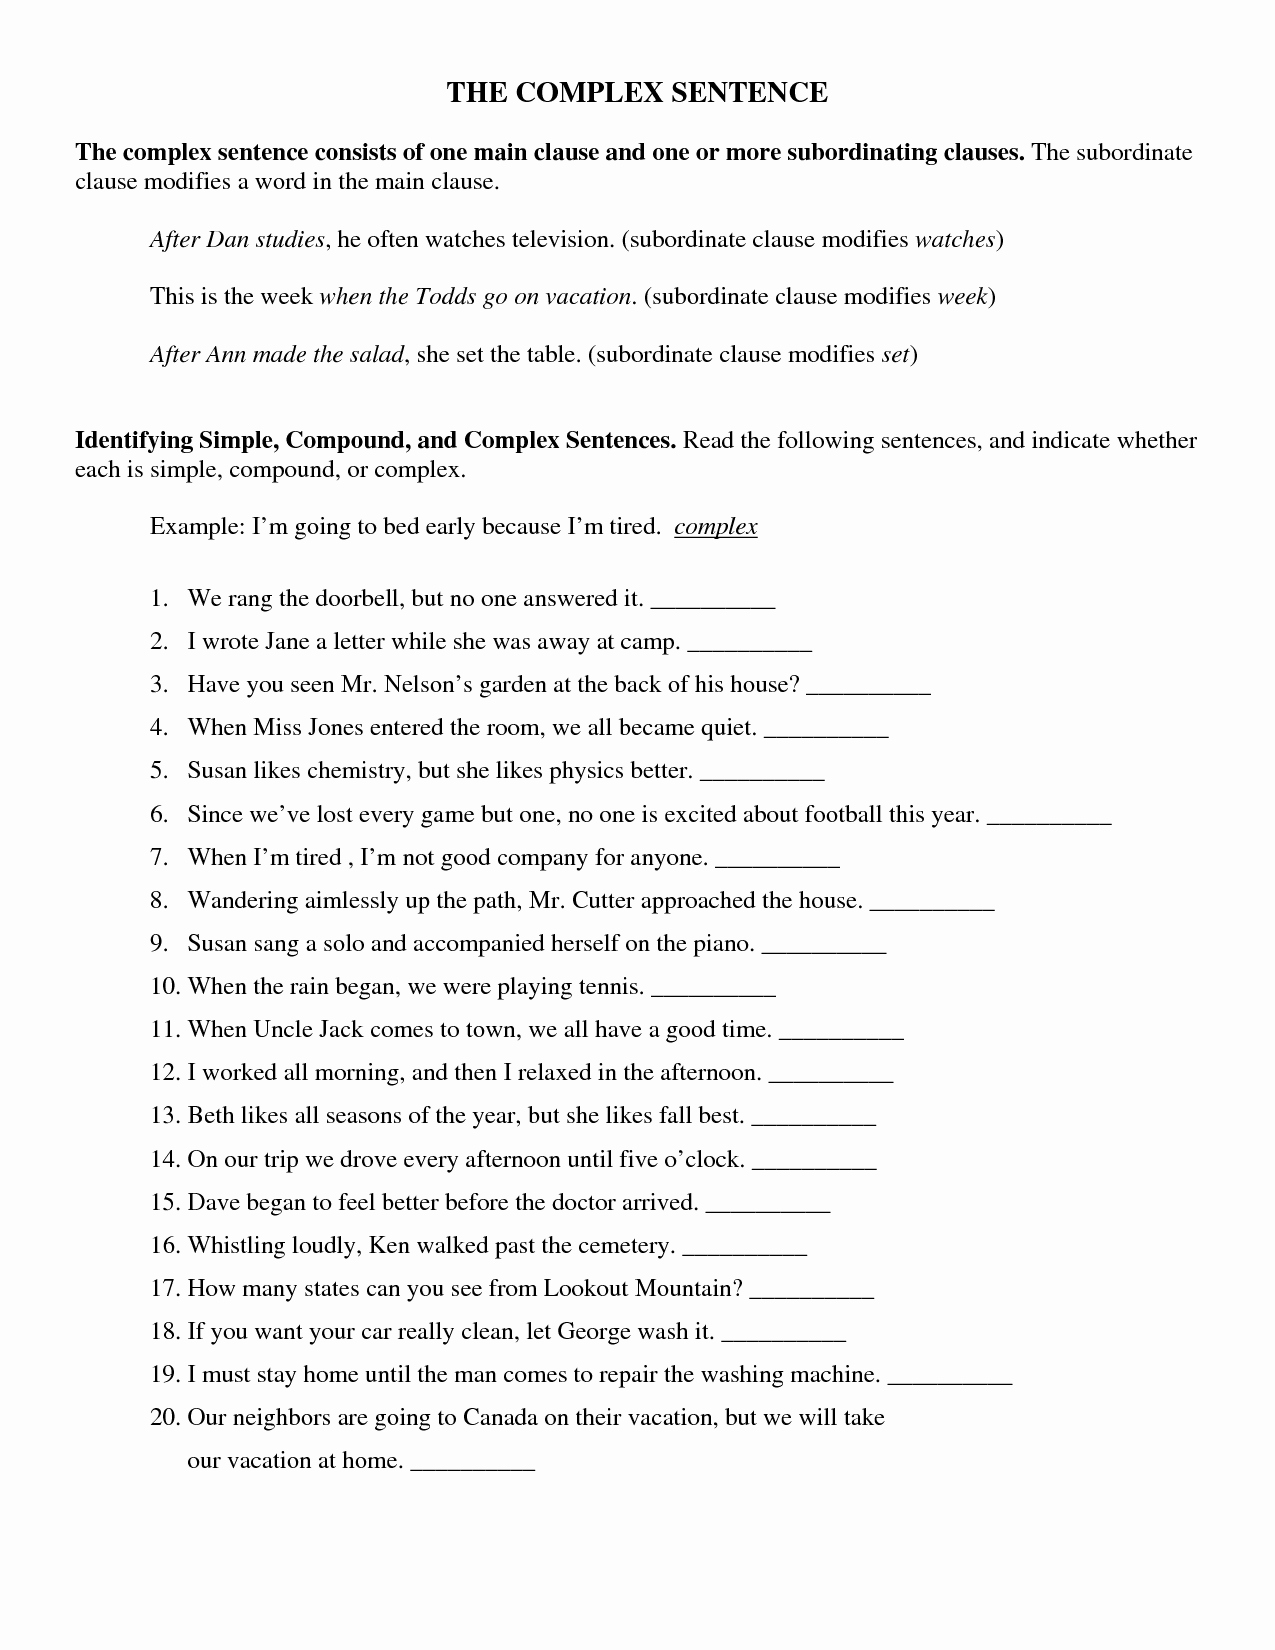 Compound Sentences Worksheet with Answers Beautiful Pound Plex Sentences Worksheet with Answer Key the